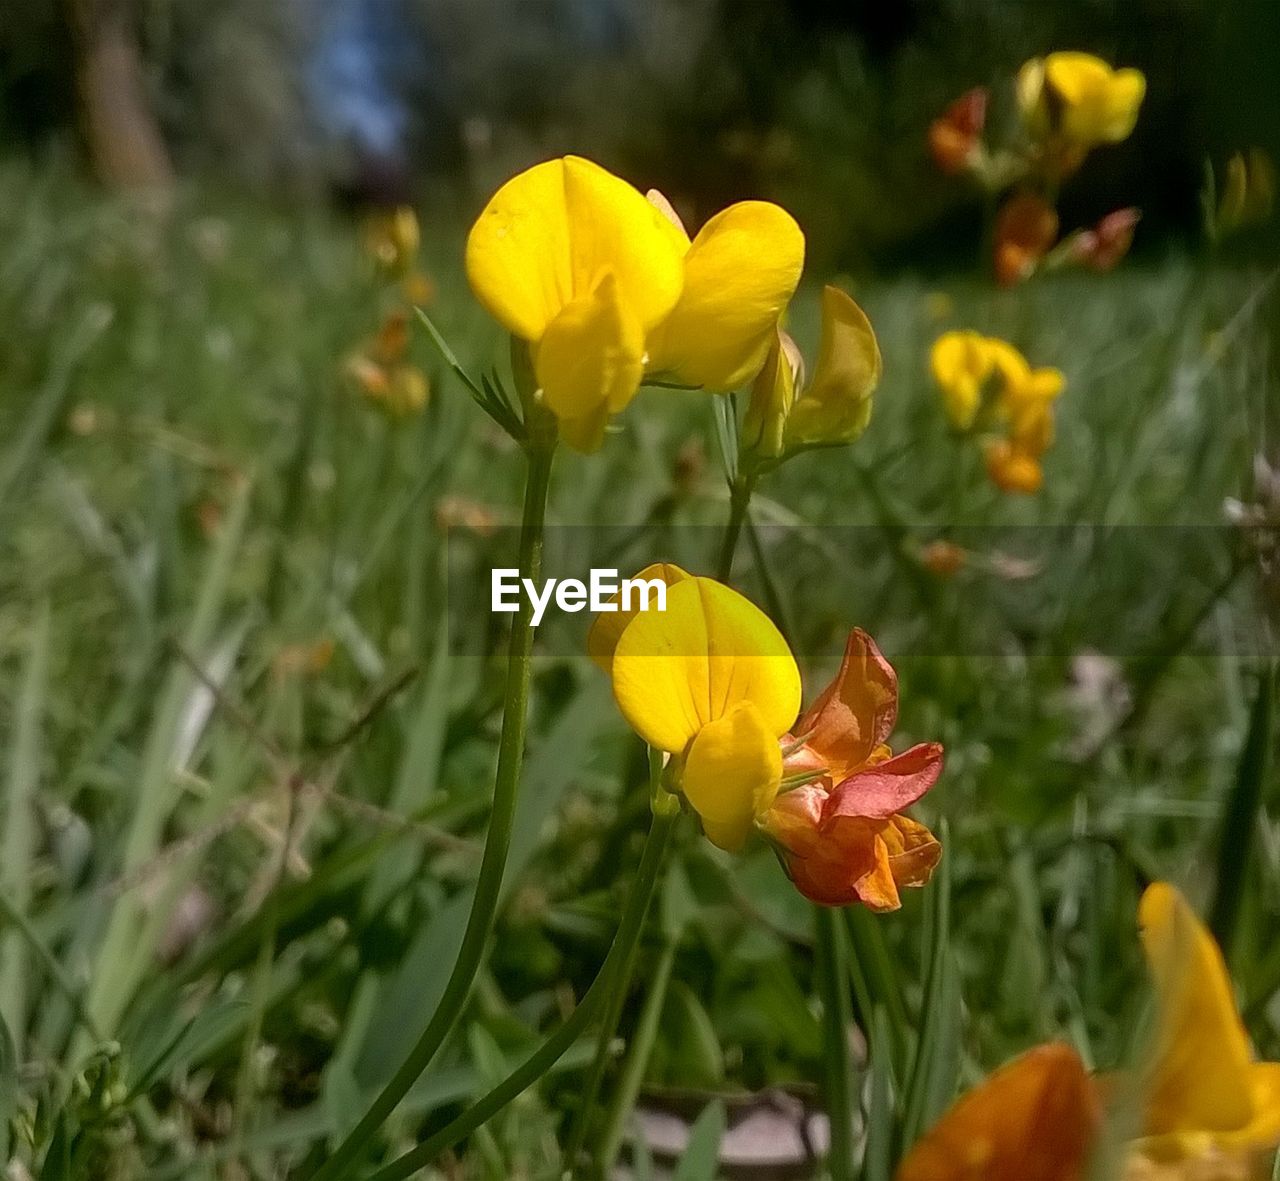 CLOSE-UP OF YELLOW FLOWERS IN GARDEN